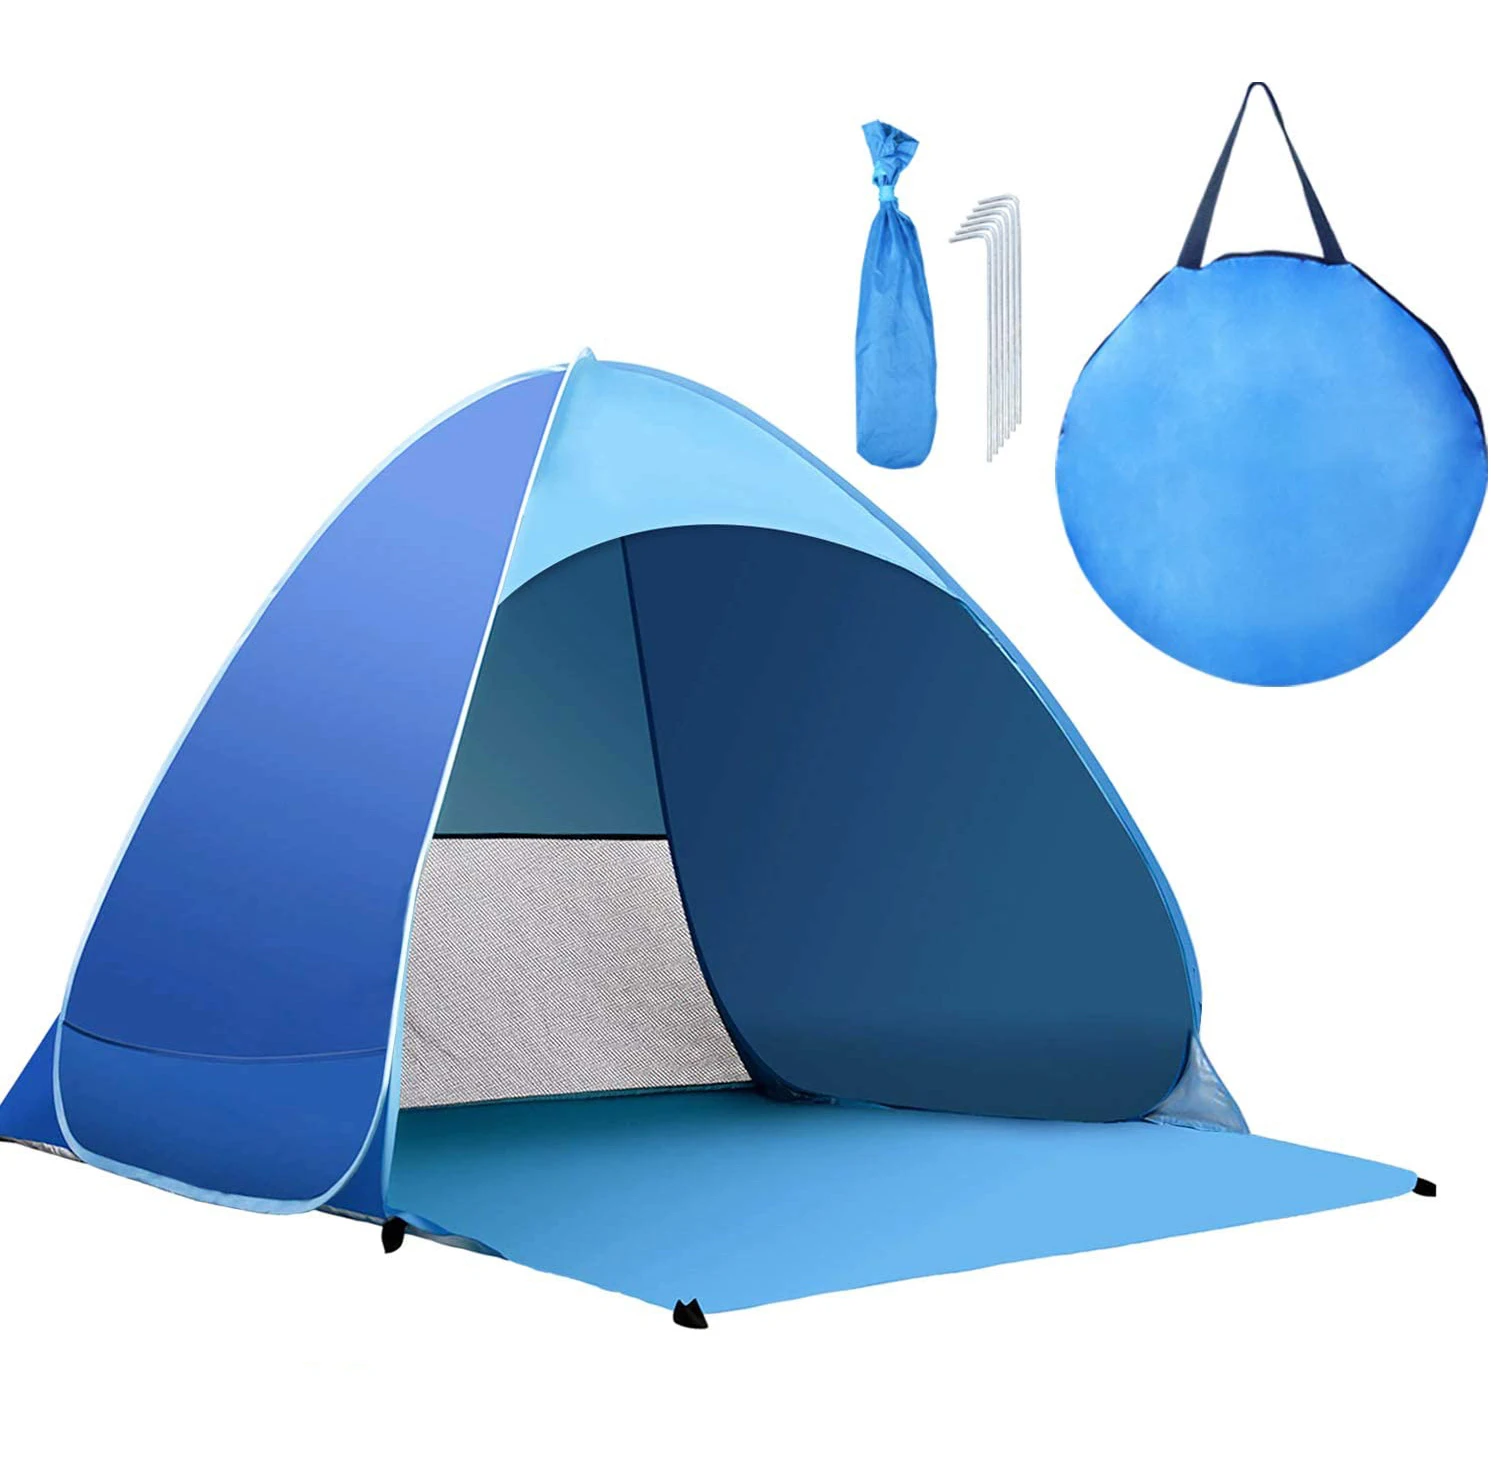 

Portable Quick Automatic Opening Beach Tents, Sun Shelter waterproof Camping Outdoor Tents Pop Up Beach Tent, Customized colors